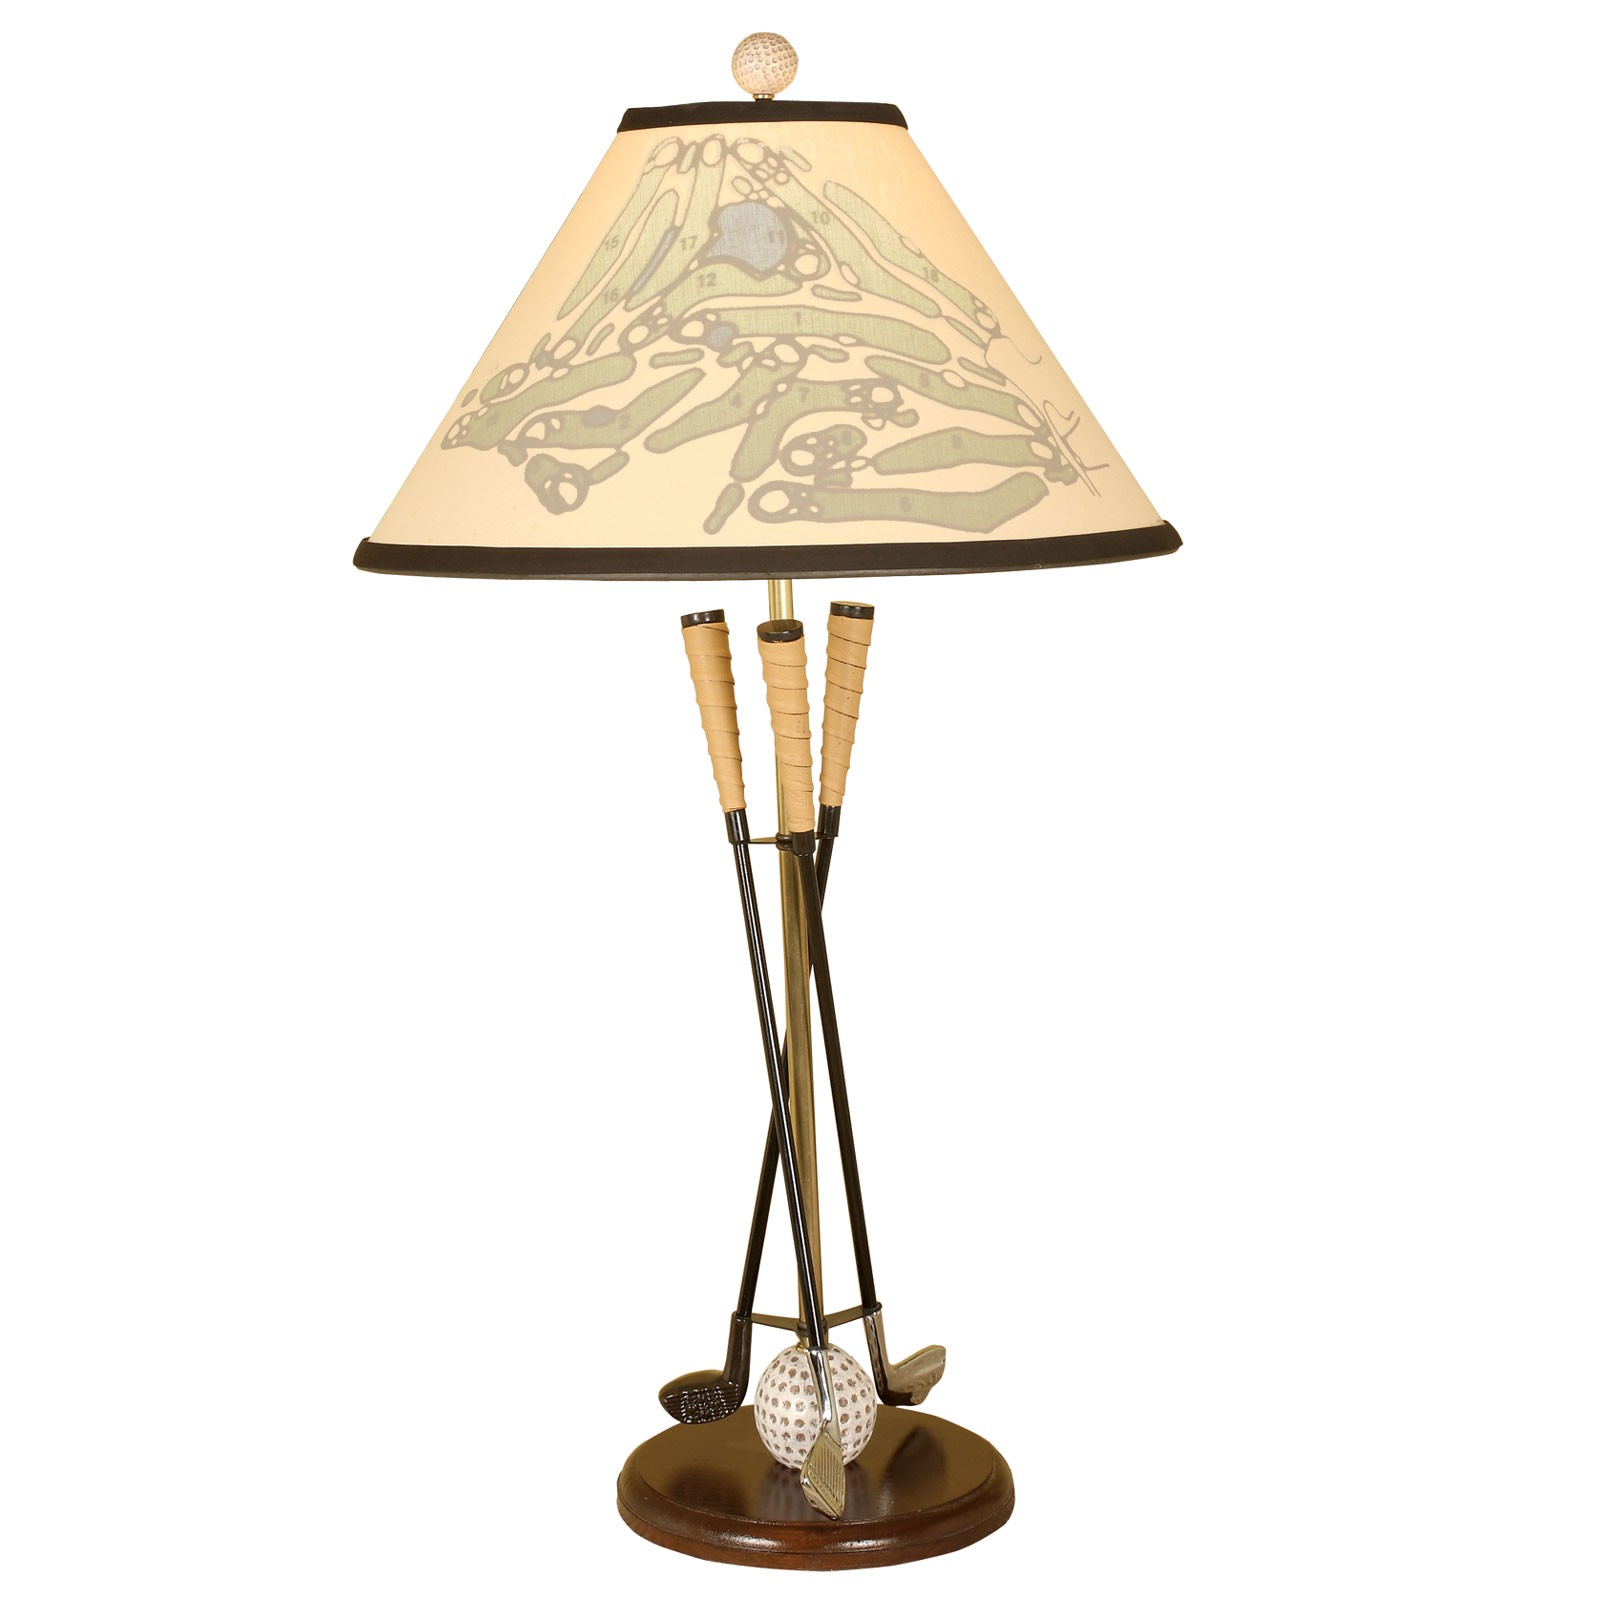 Golf club table lamp with silhouette shade by passport